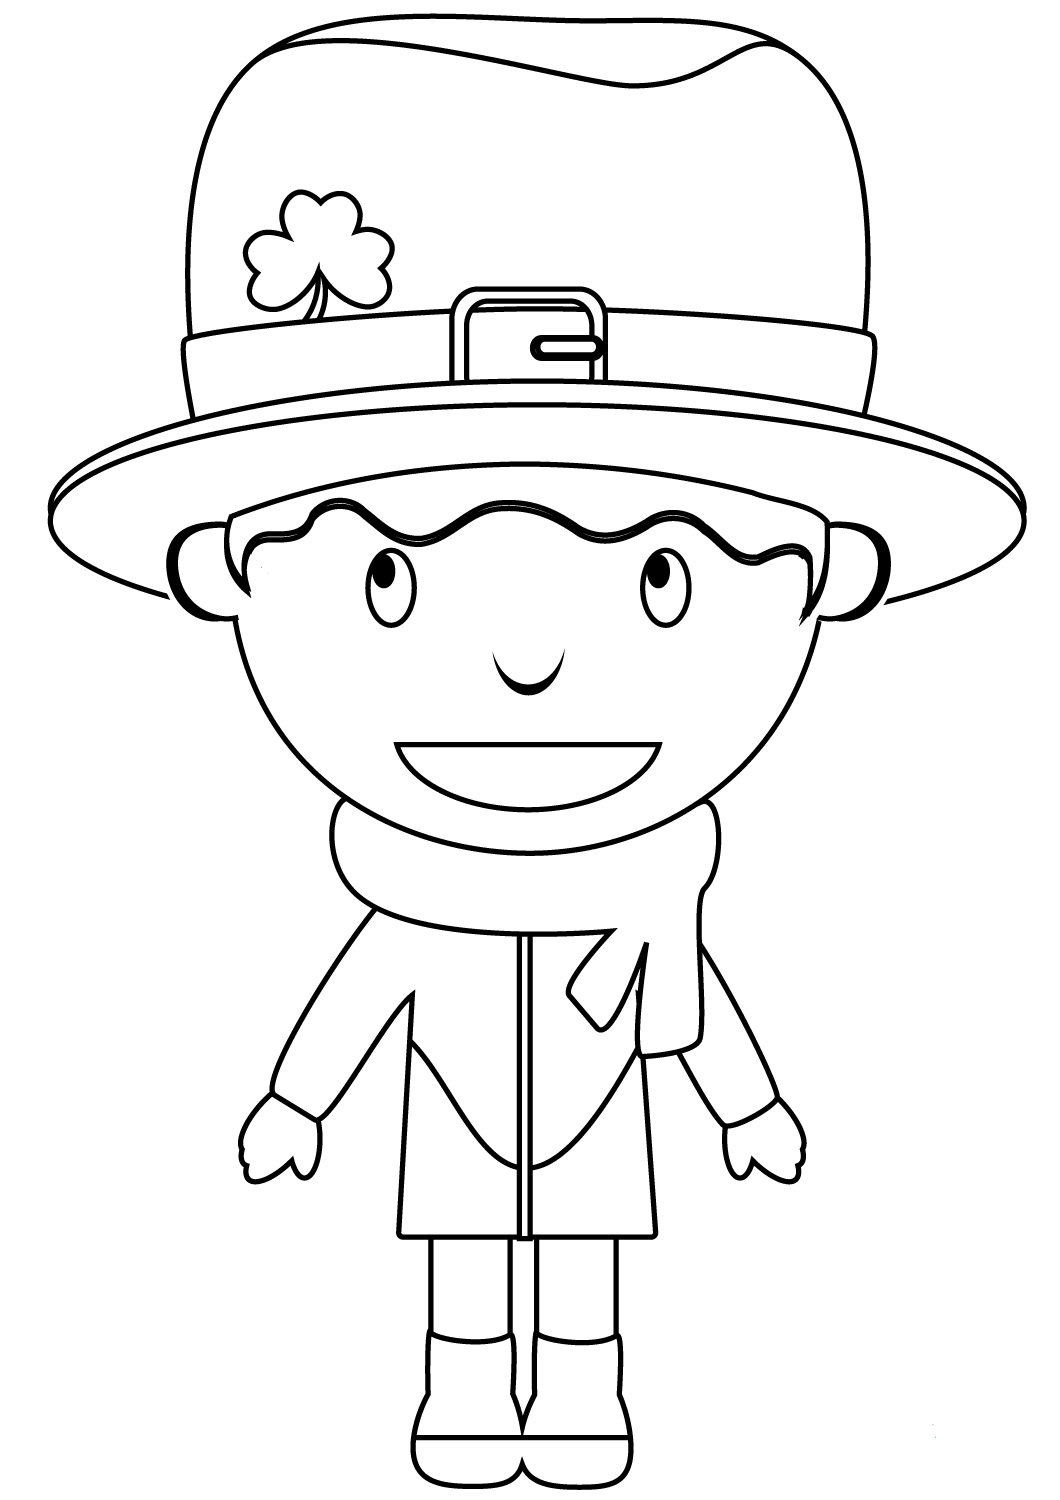 printable-images-of-leprechauns